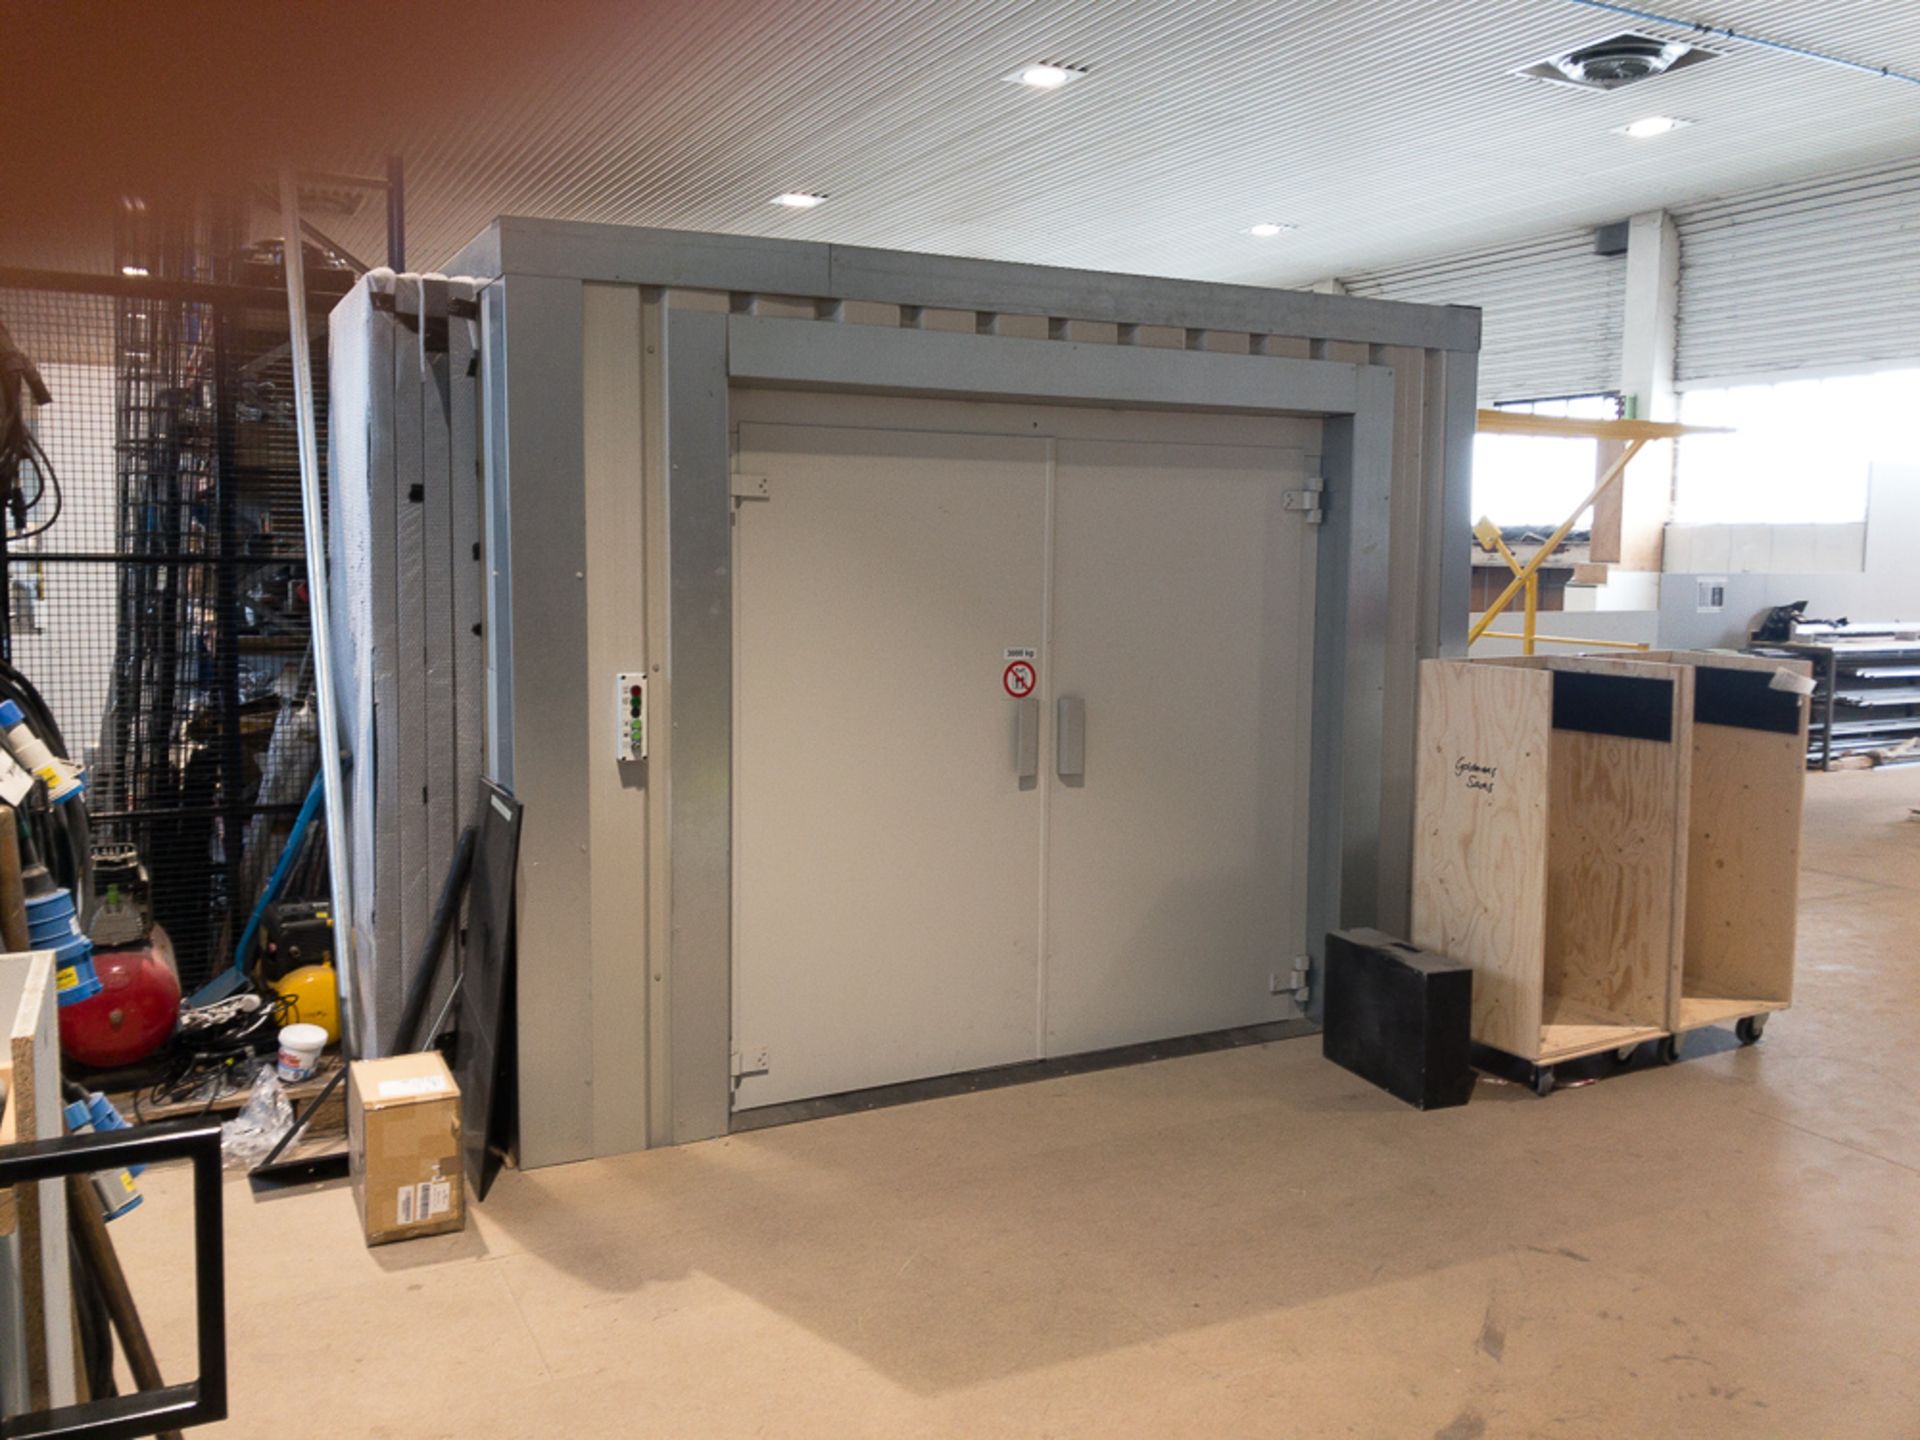 2019 Hidral EH/DCL-5000 3000kg capacity goods lift - Image 2 of 7